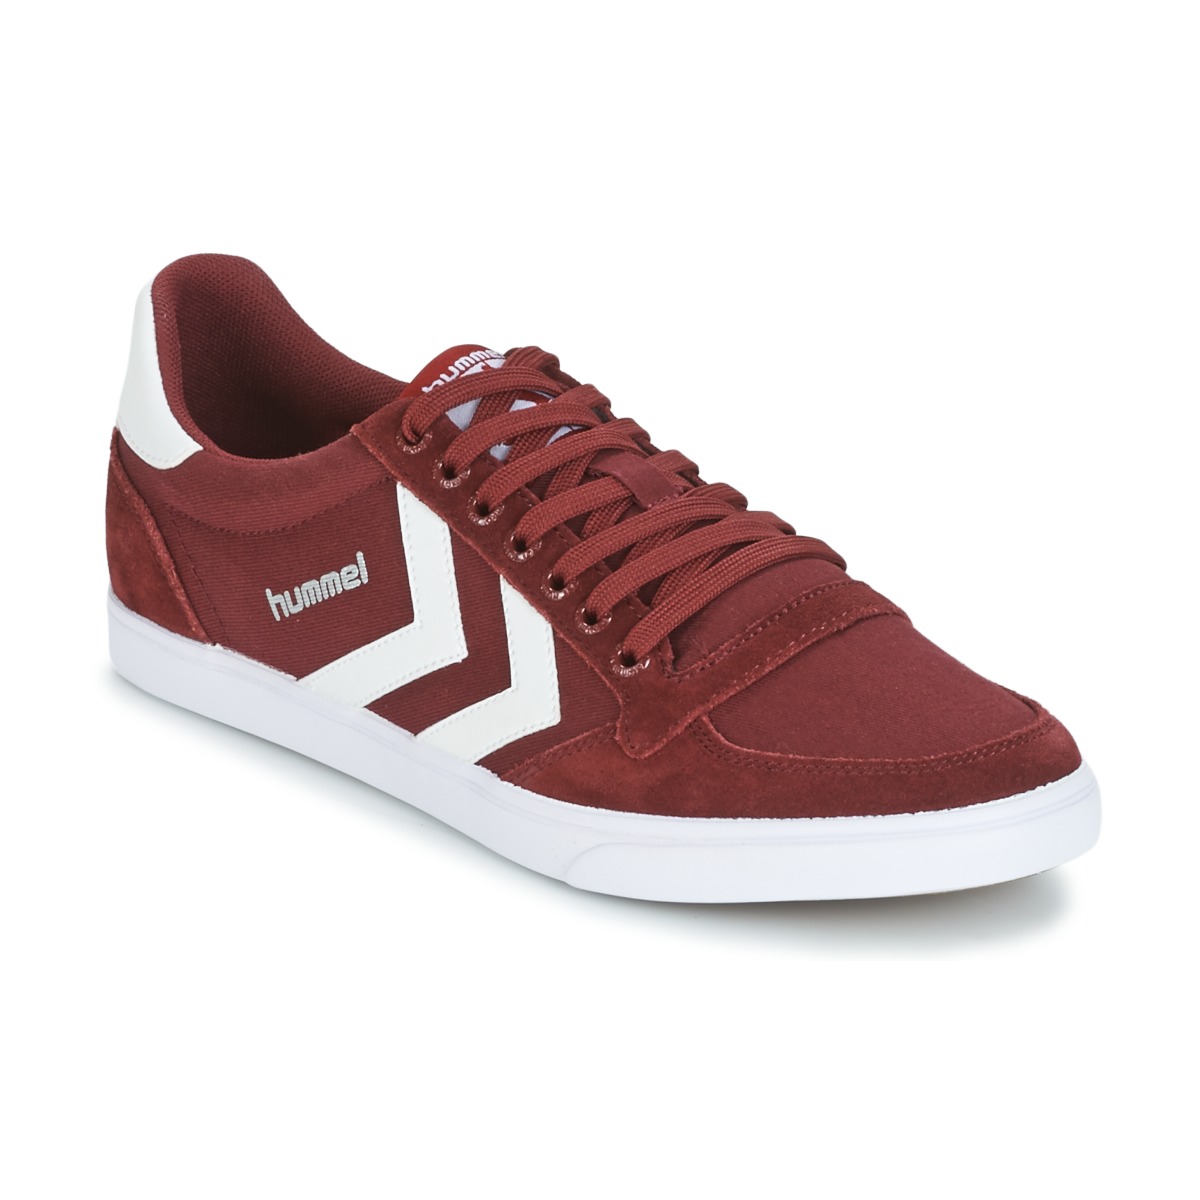 Xαμηλά Sneakers Hummel STADIL CANEVAS LOW Ύφασμα